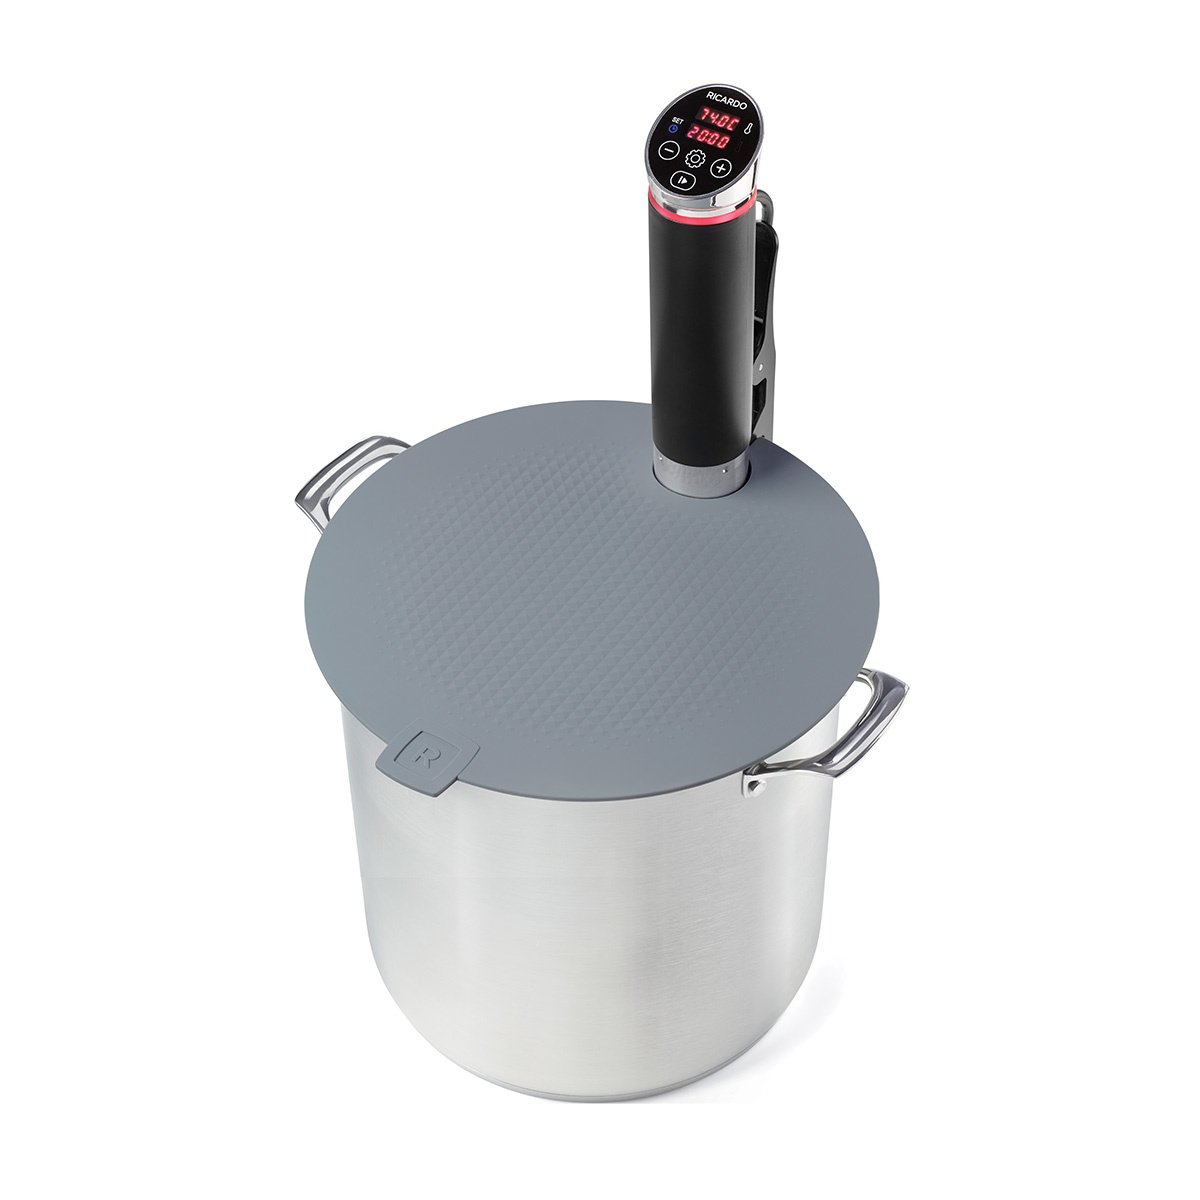 Where (online) can I get a lid for the sous vide 34cm pot? : r/cookware